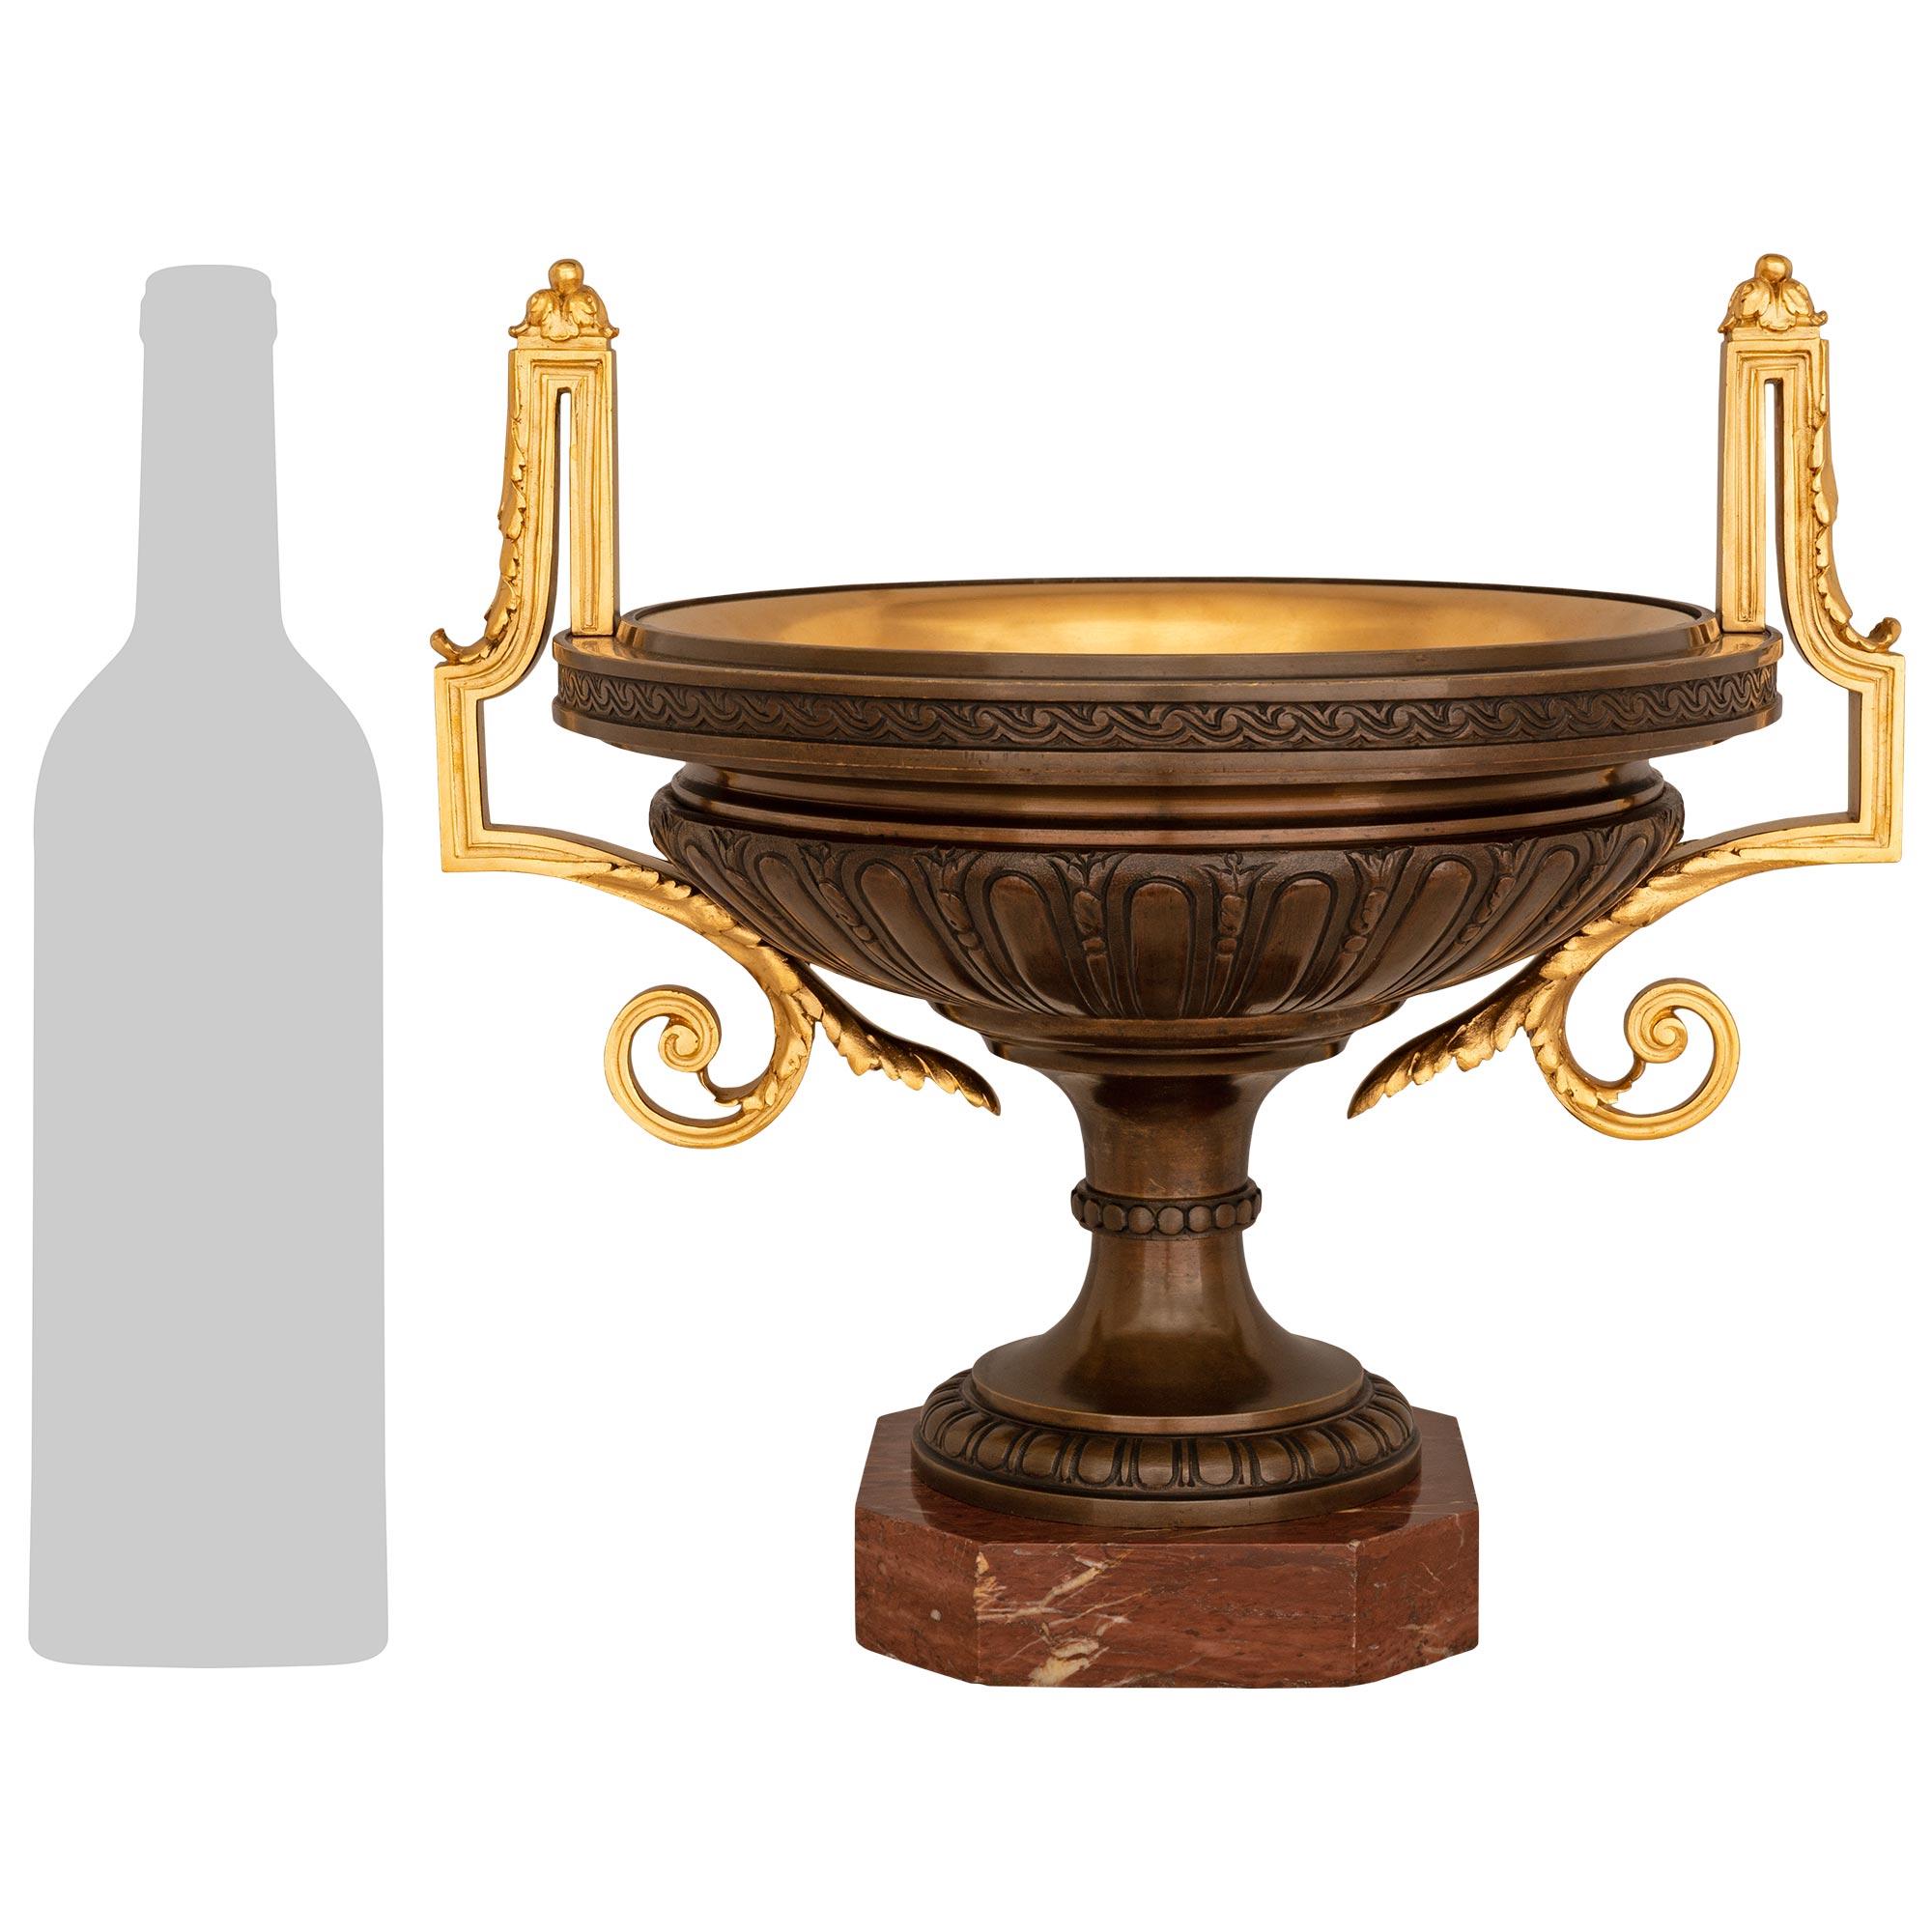 A stunning and most decorative pair of French 19th century Neo-Classical st. Patinated Bronze, Ormolu, and Rouge Griotte marble urns. Each impressive urn is raised by an octagonal Rouge Griotte marble base. The patinated Bronze socle above is